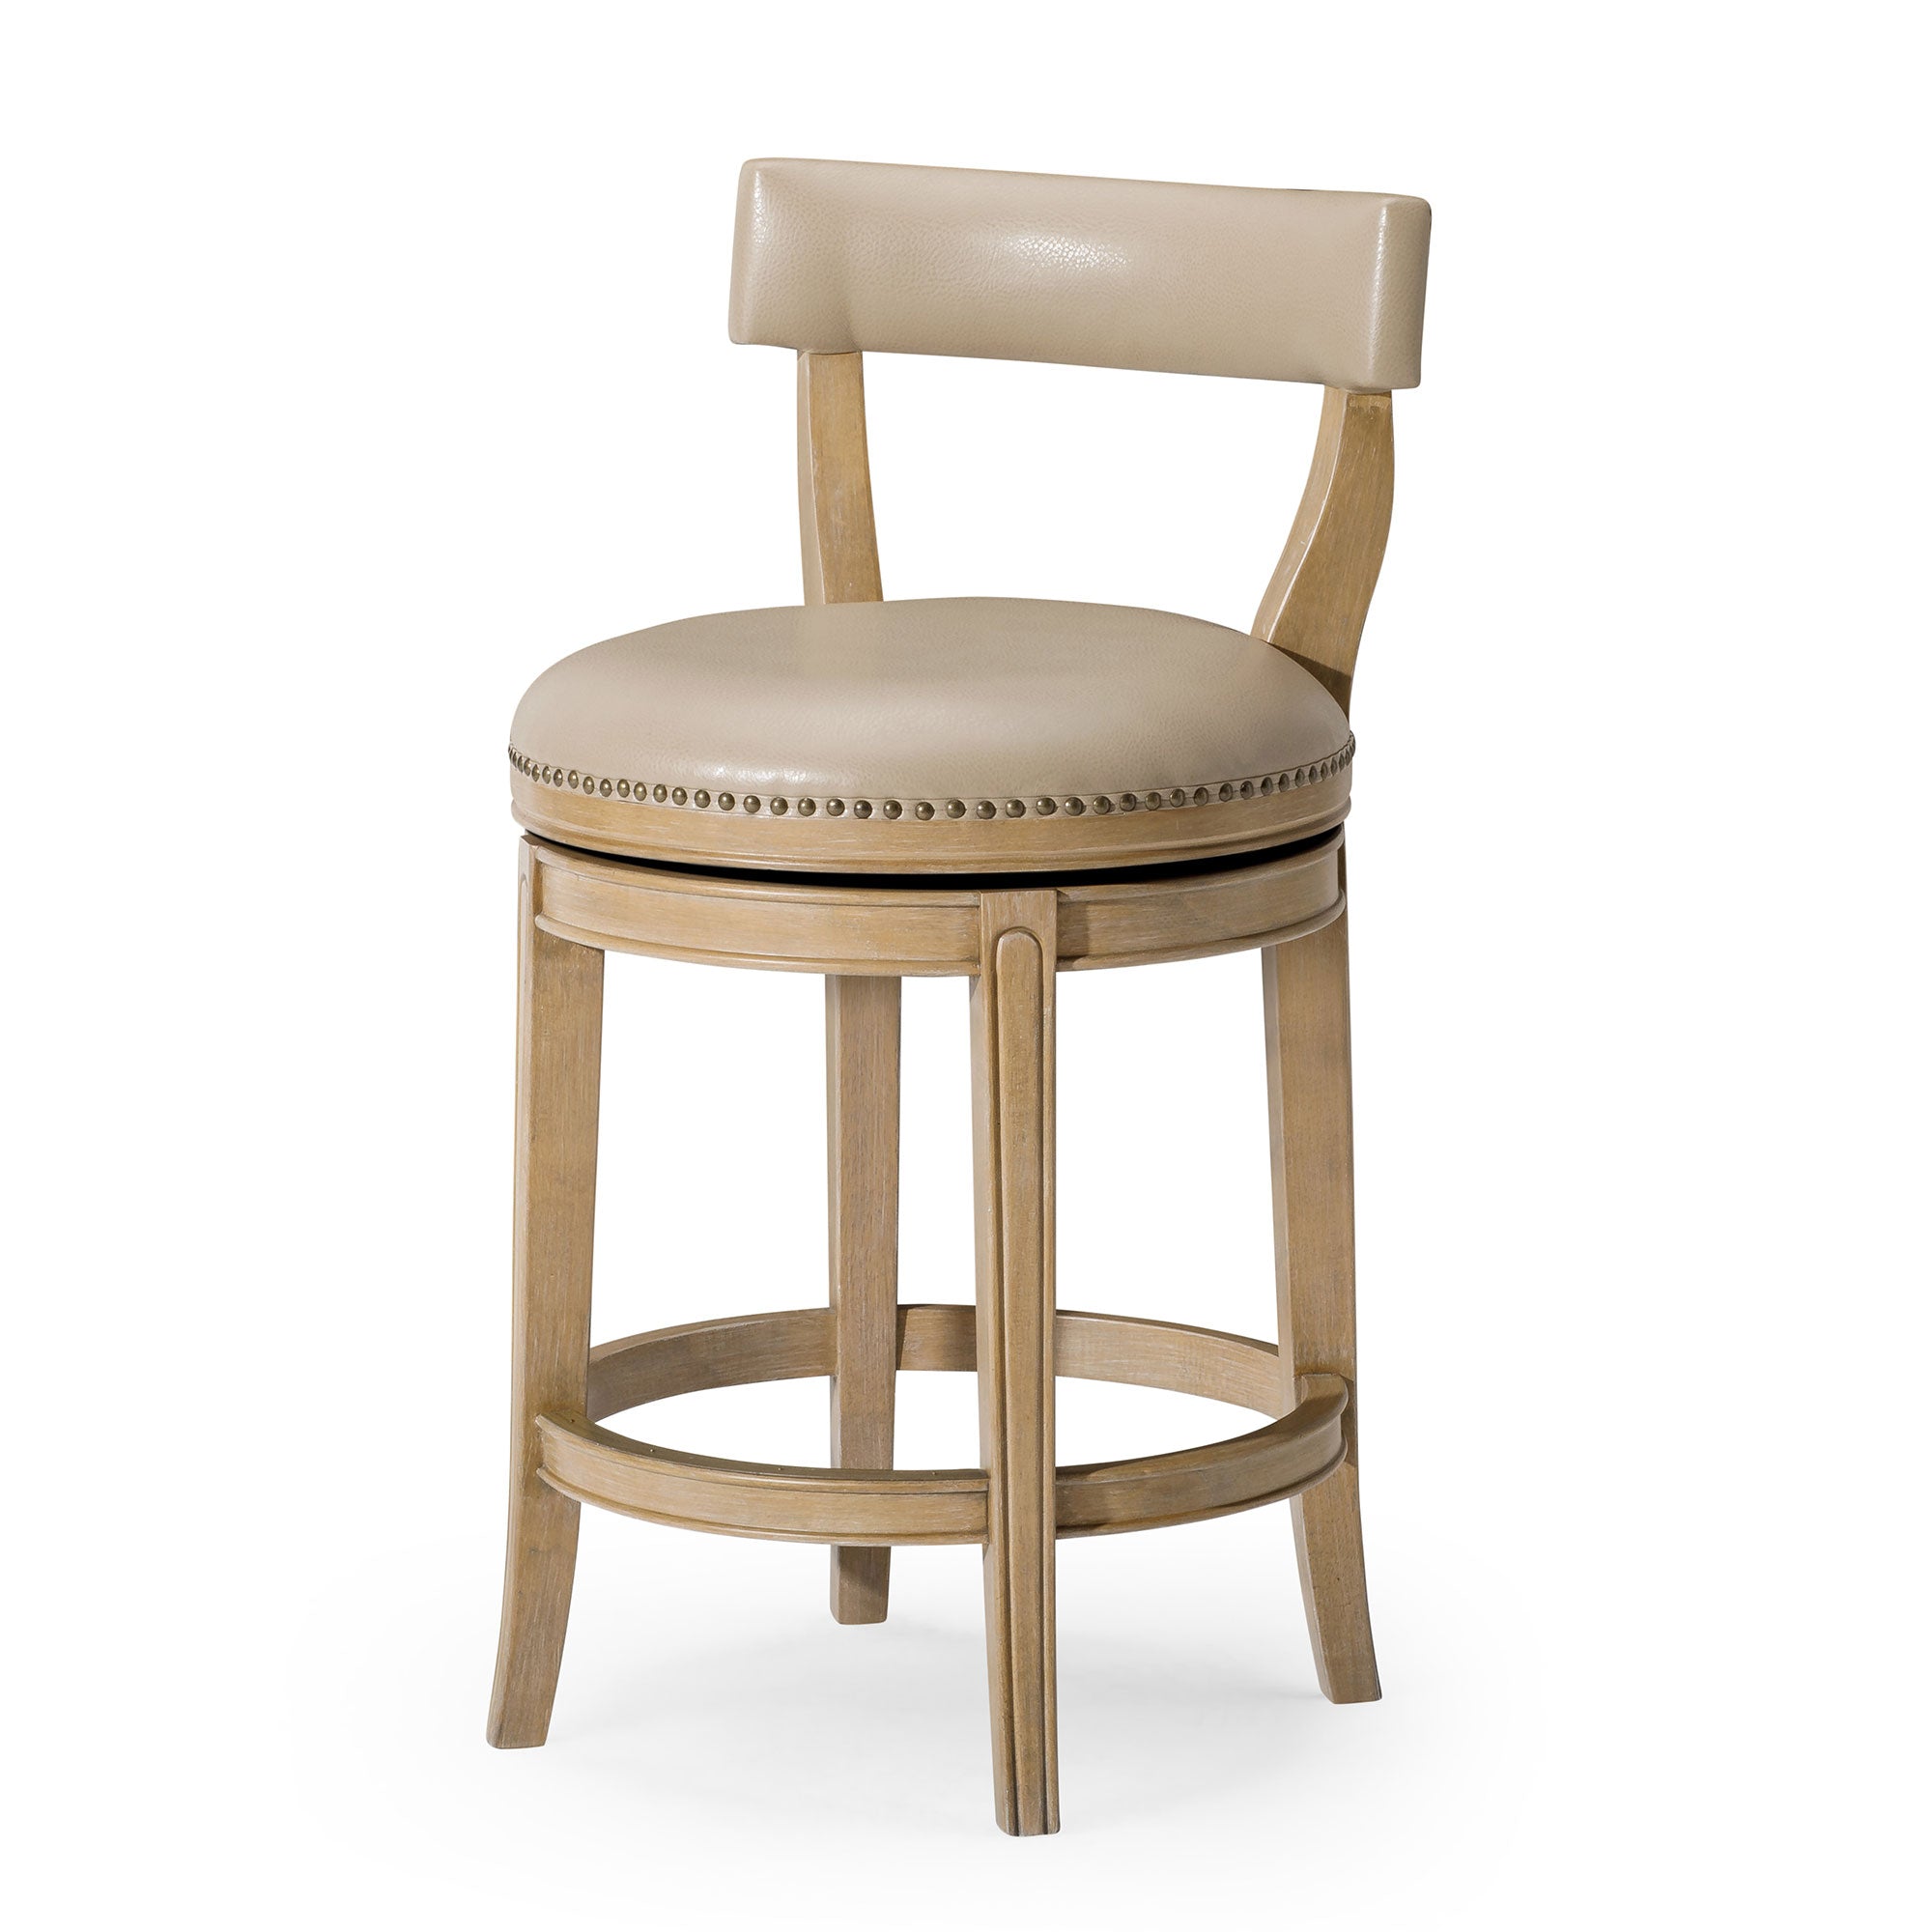 Alexander Counter Stool in Weathered Oak Finish with Avanti Bone Vegan Leather in Stools by Maven Lane